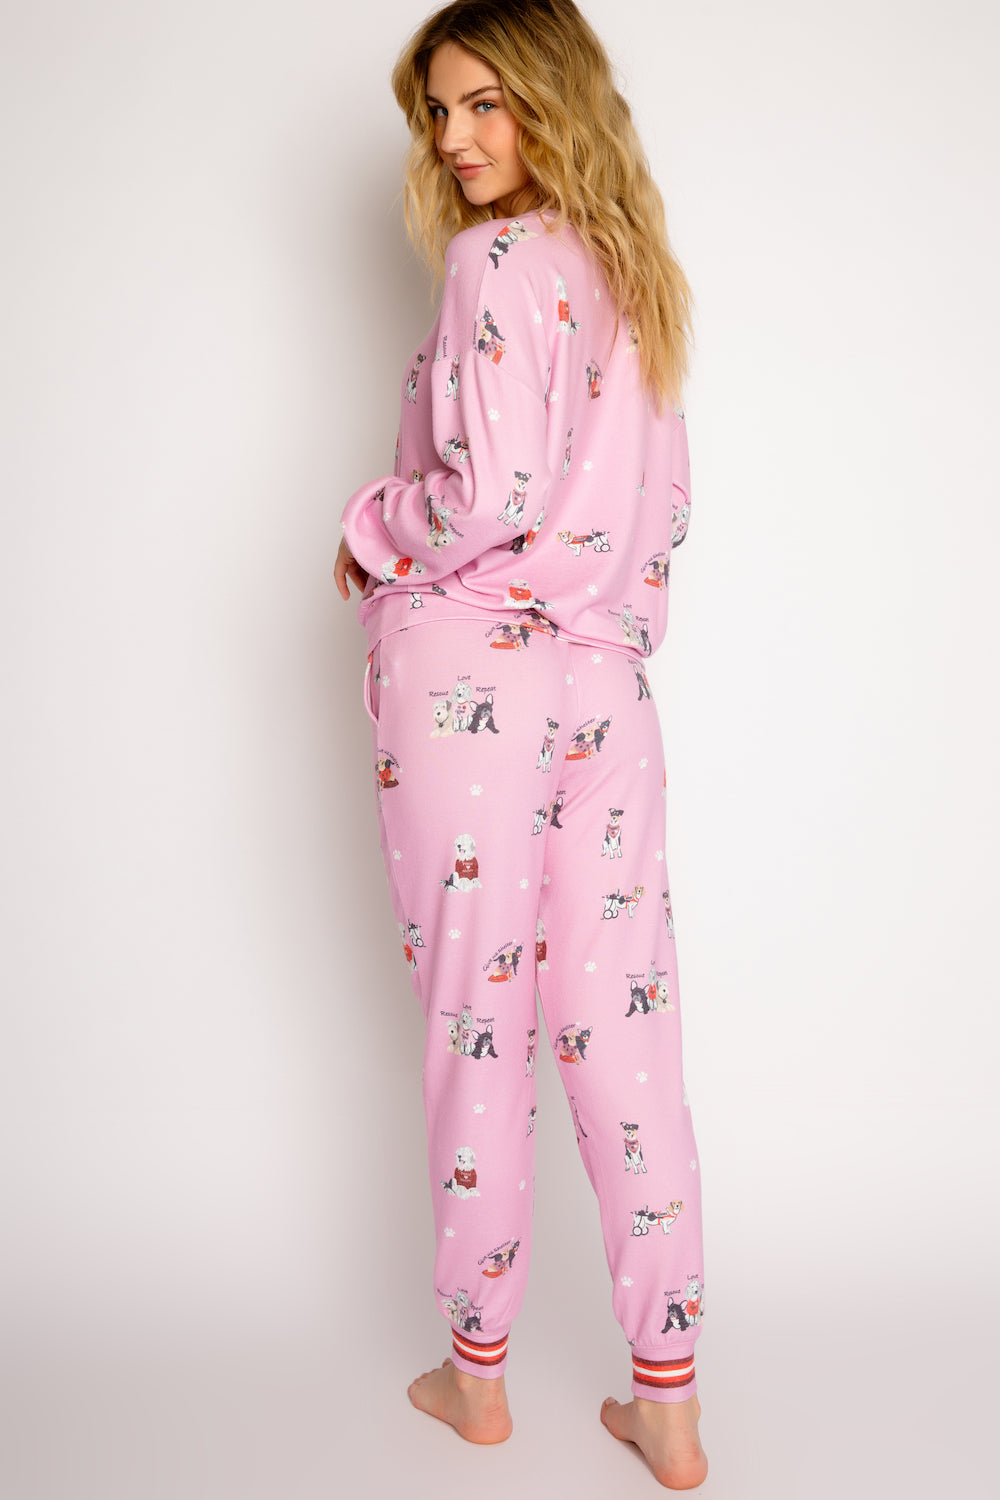 PJ Salvage Rescues Are My Favourite Breed Set Sleepwear - Other Sleepwear - Loungewear by PJ Salvage | Grace the Boutique